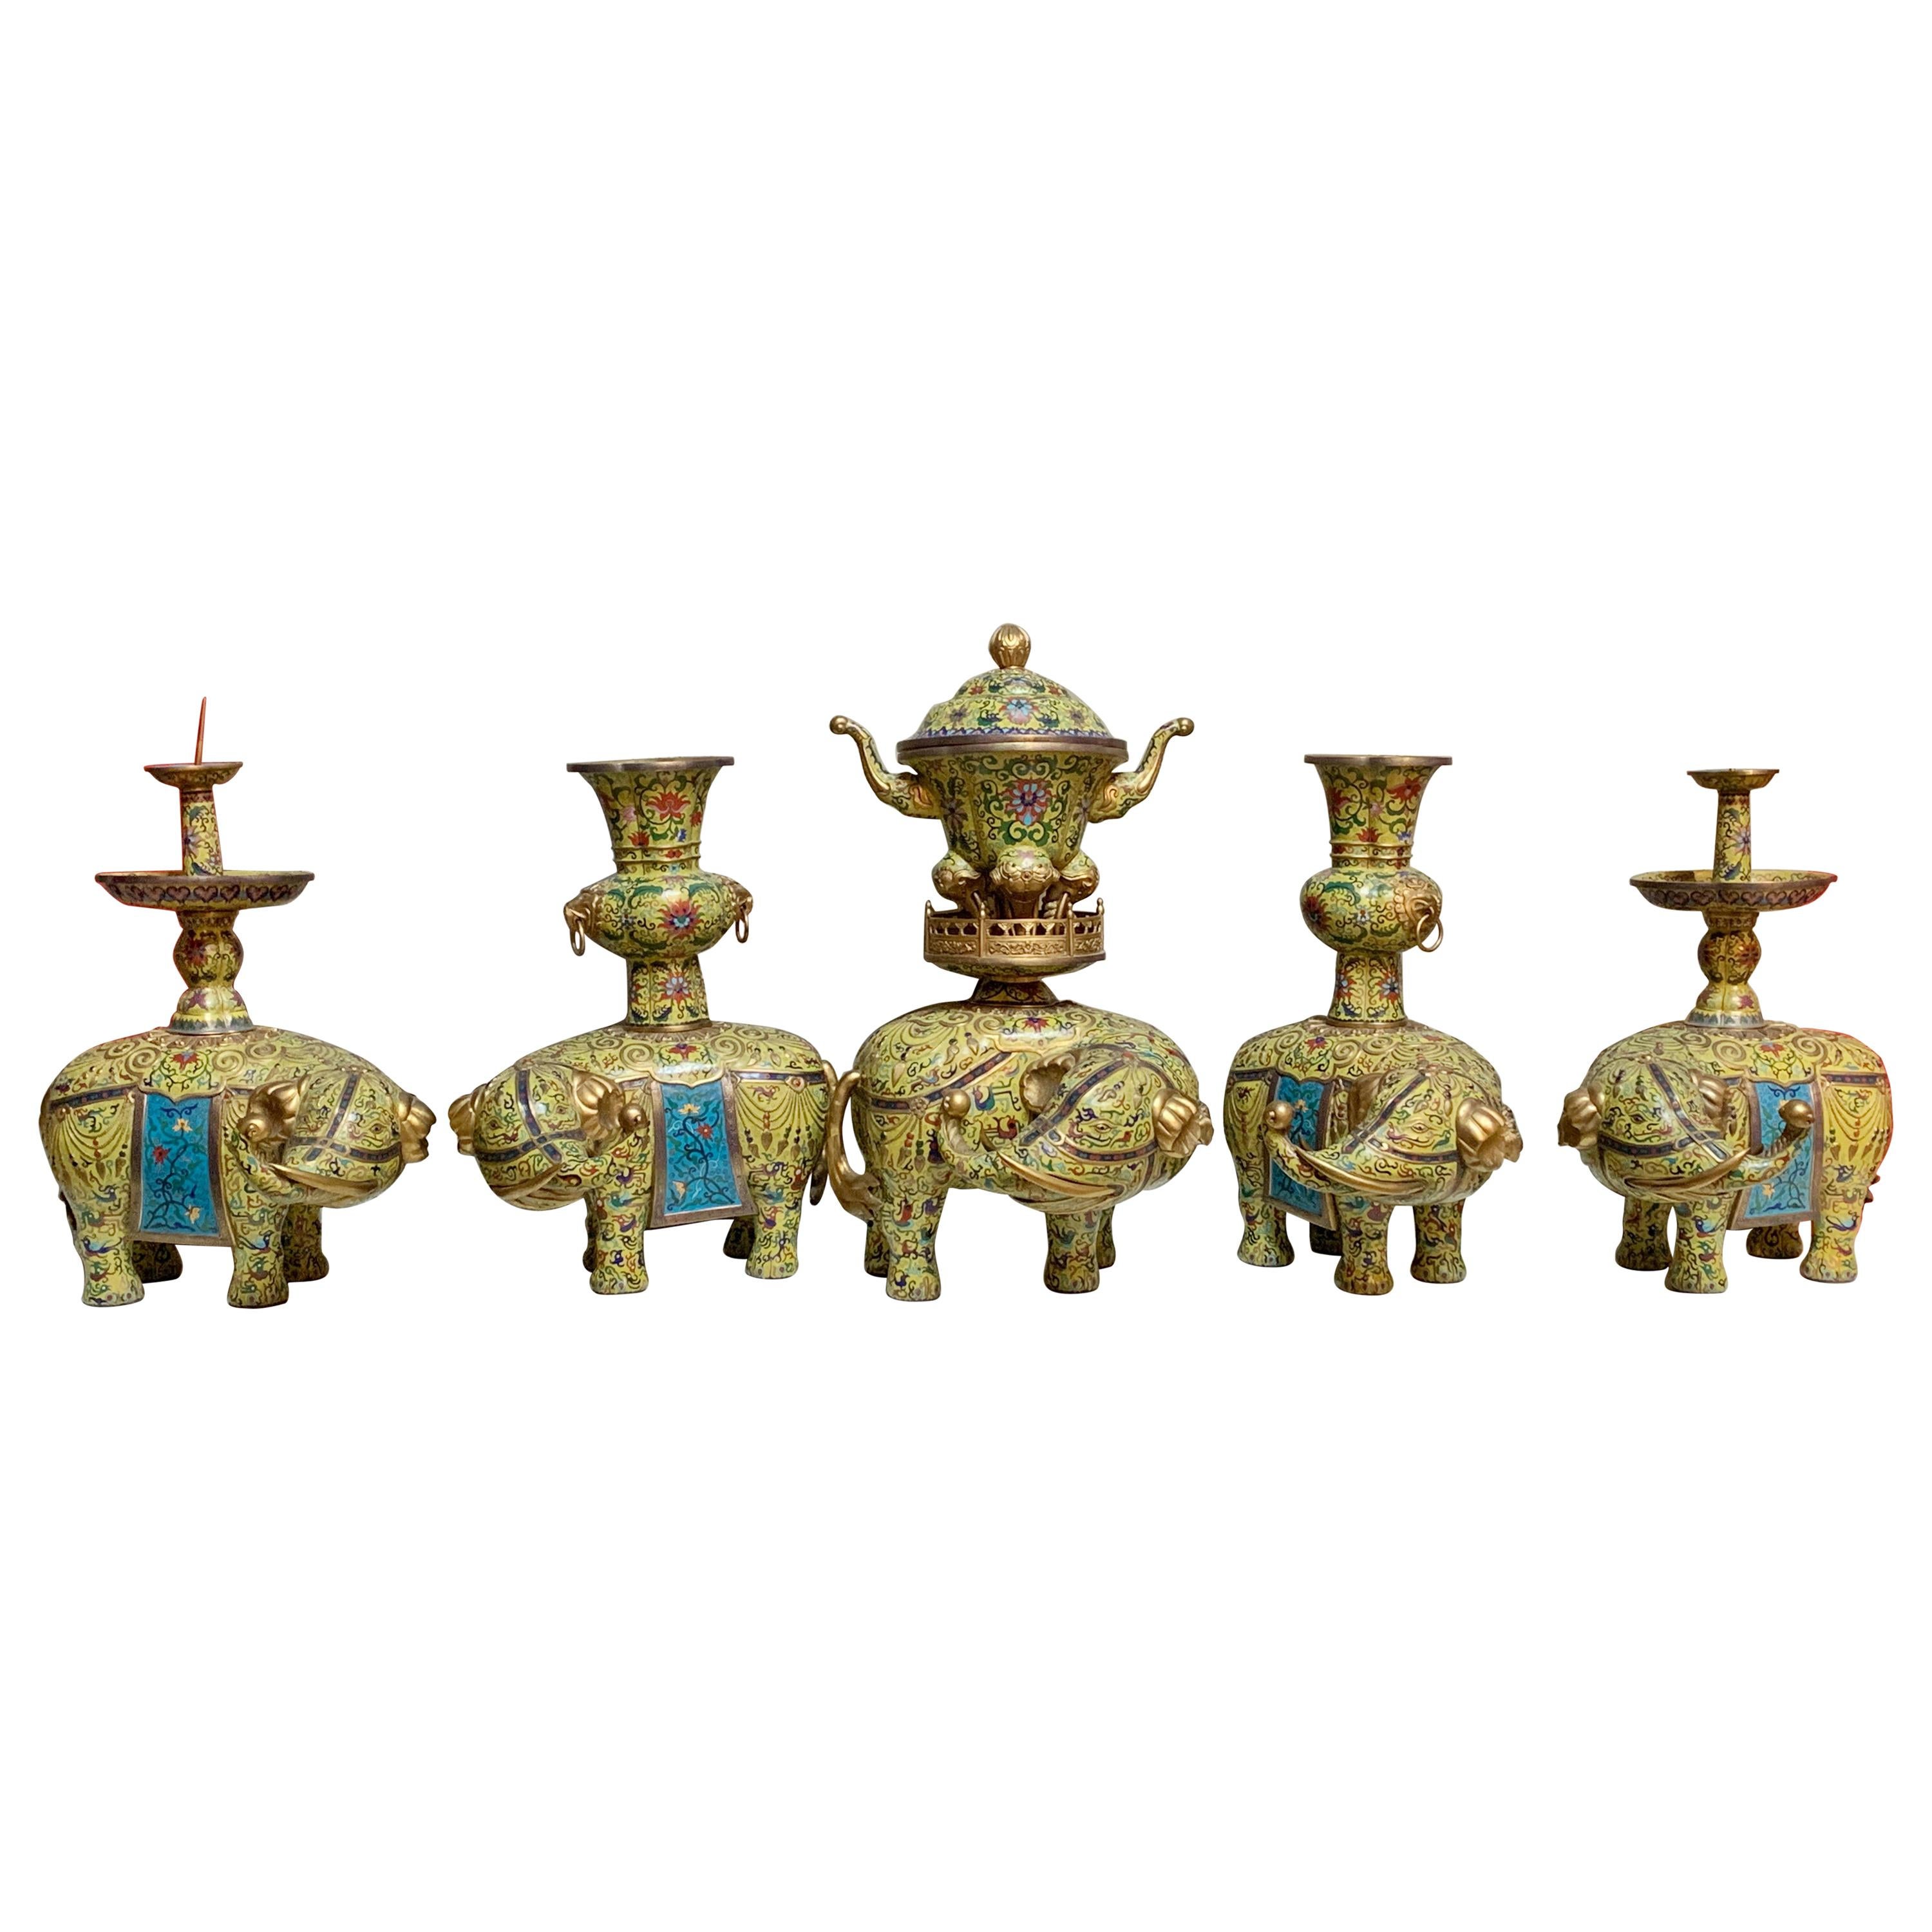 Five Piece Elephant Chinese Yellow and Blue Cloisonne and Gilt Bronze Alter Set